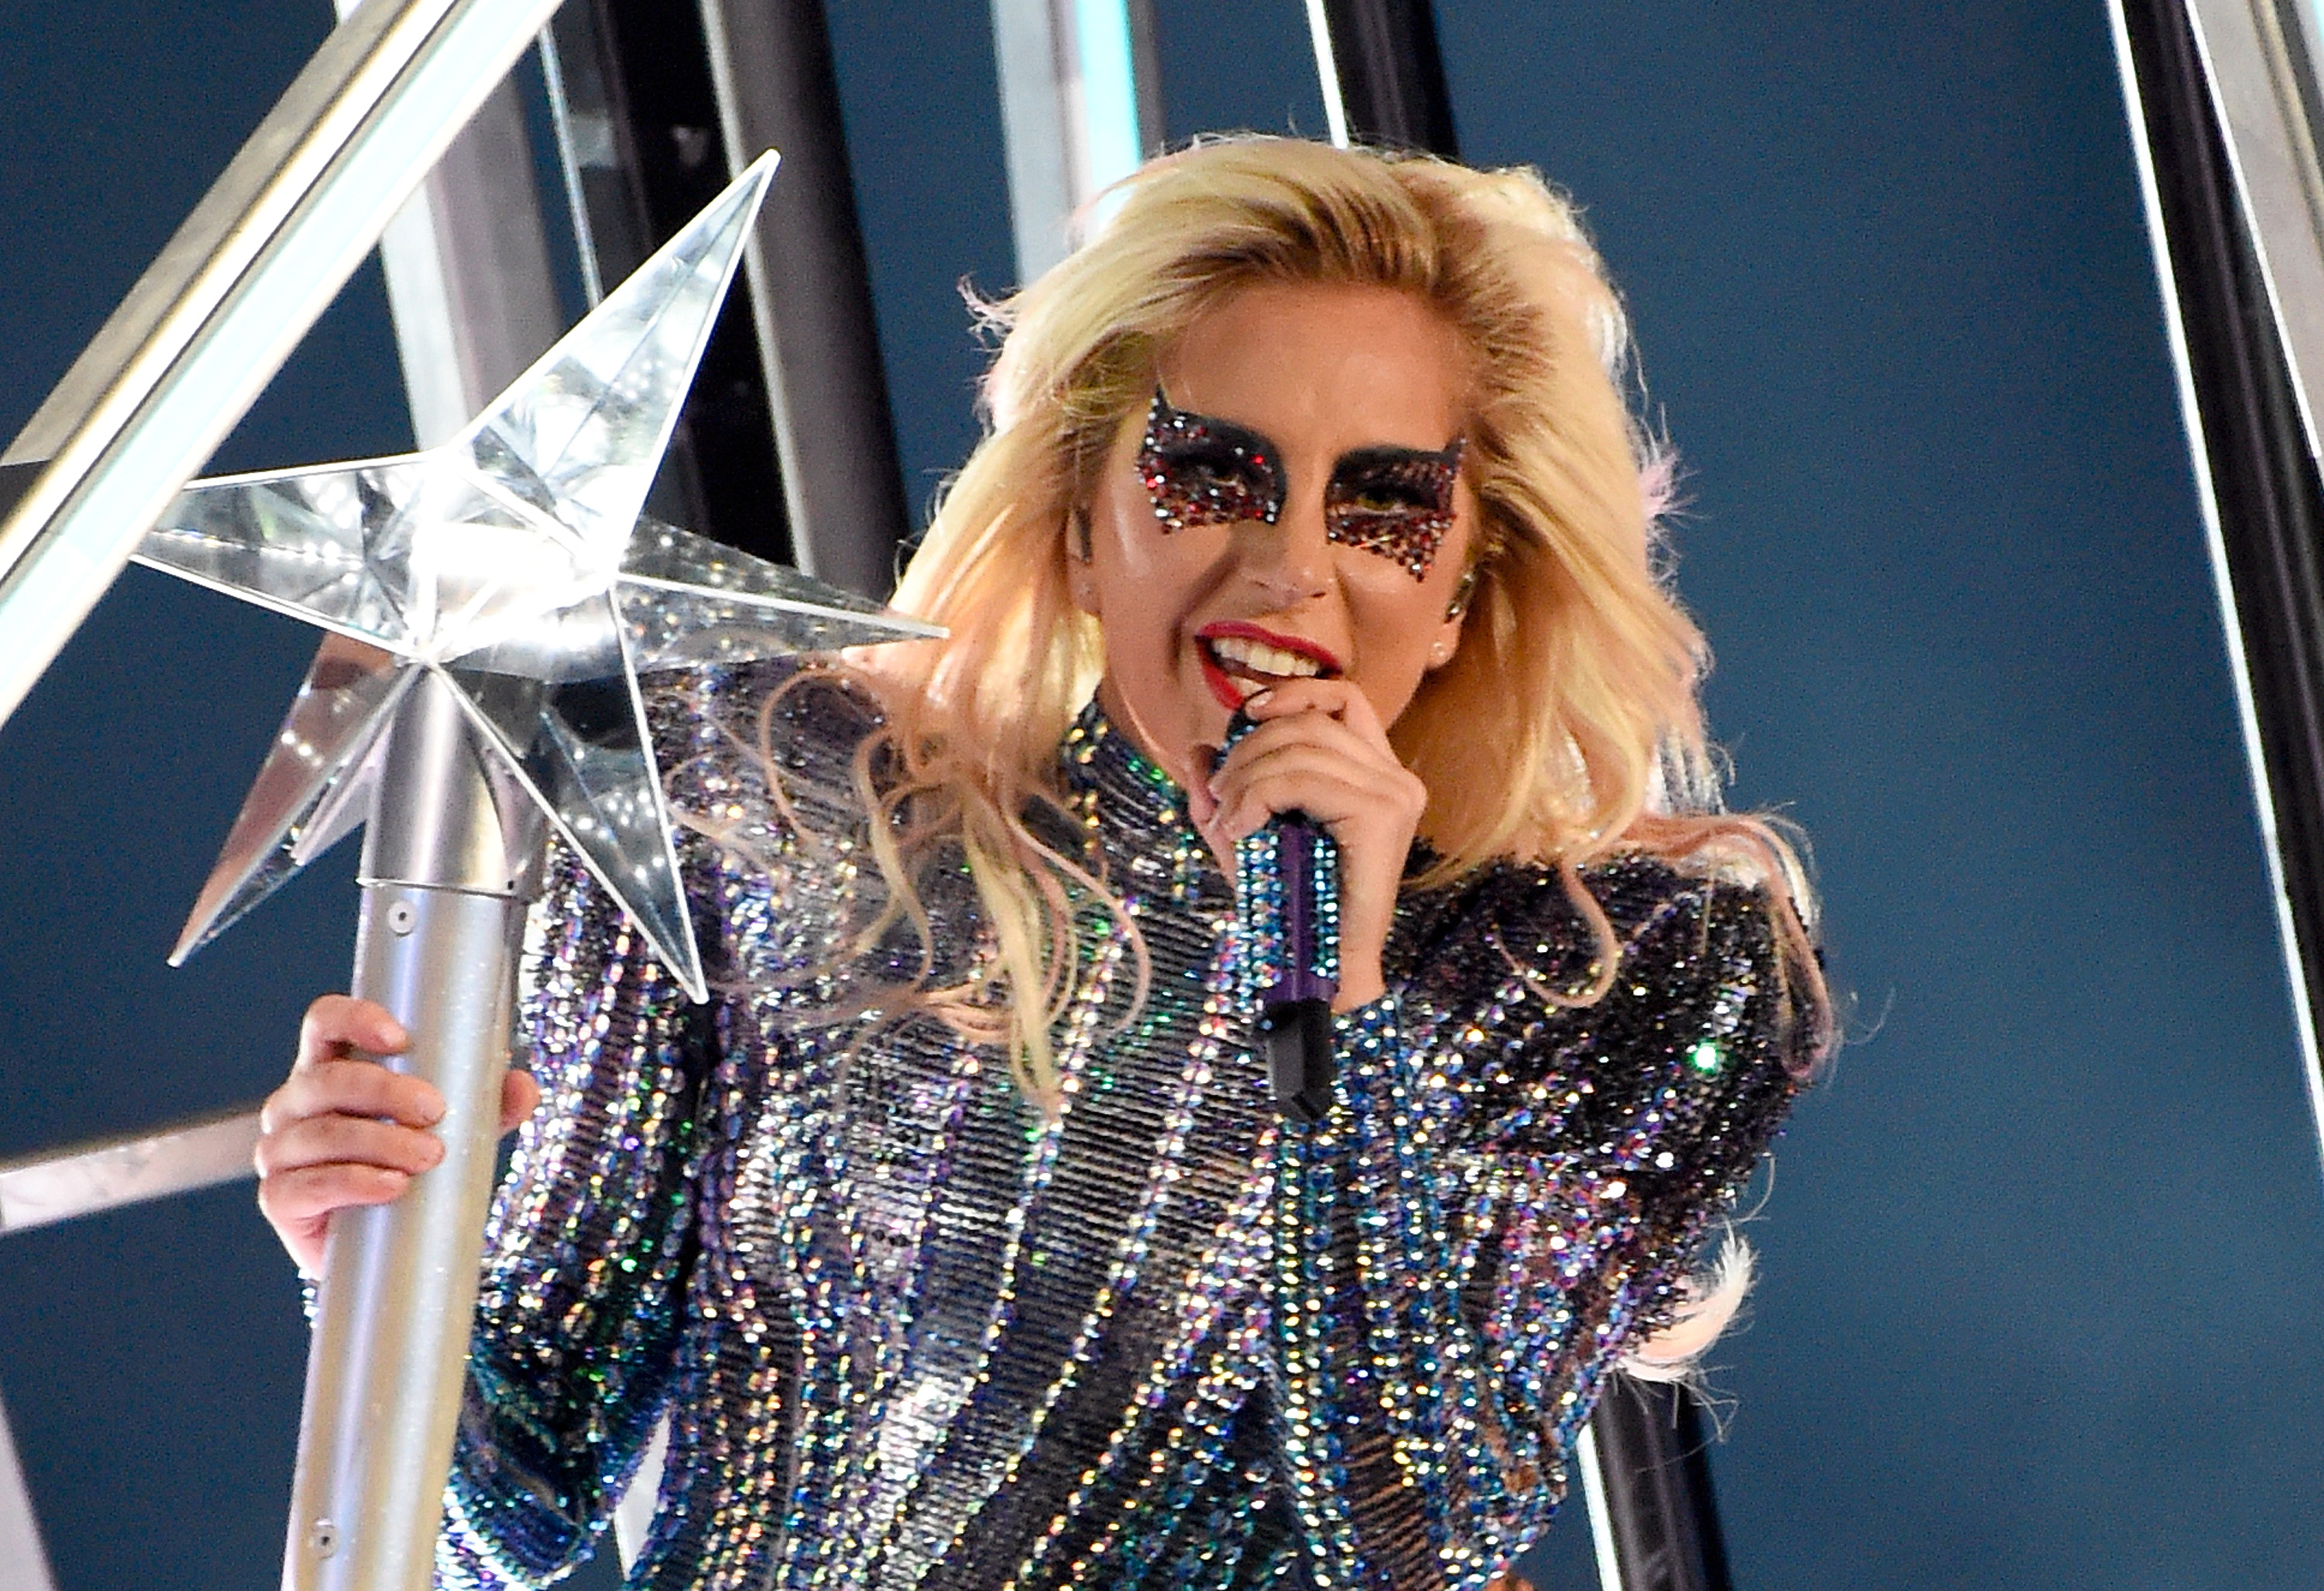 HOUSTON, TX - FEBRUARY 05:  Musician Lady Gaga performs onstage during the Pepsi Zero Sugar Super Bowl LI Halftime Show at NRG Stadium on February 5, 2017 in Houston, Texas.  (Photo by Kevin Mazur/WireImage)